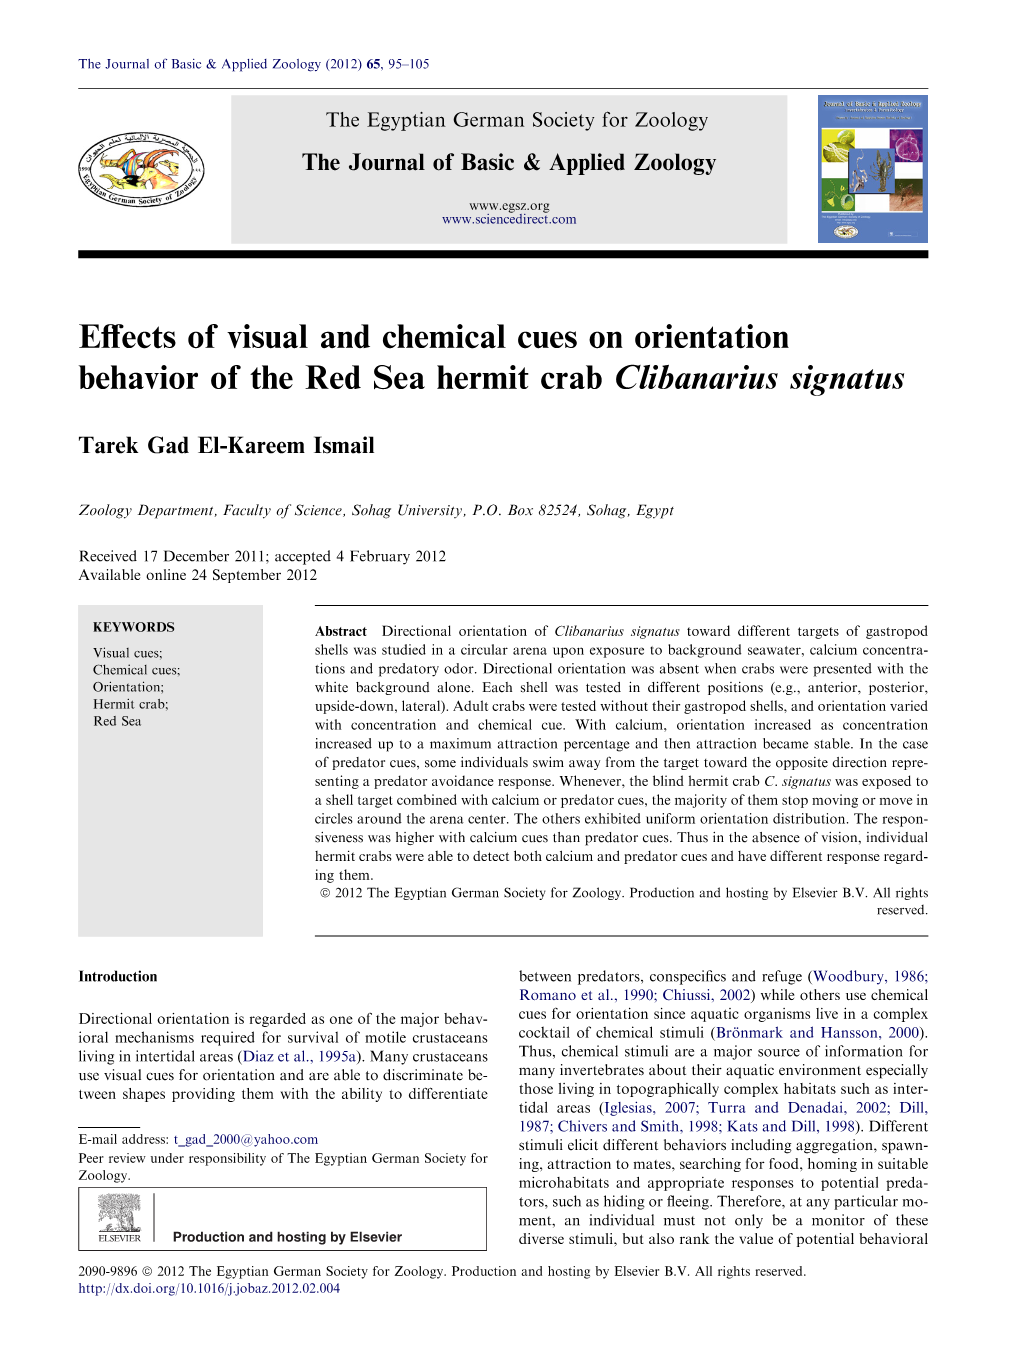 Effects of Visual and Chemical Cues on Orientation Behavior of the Red Sea